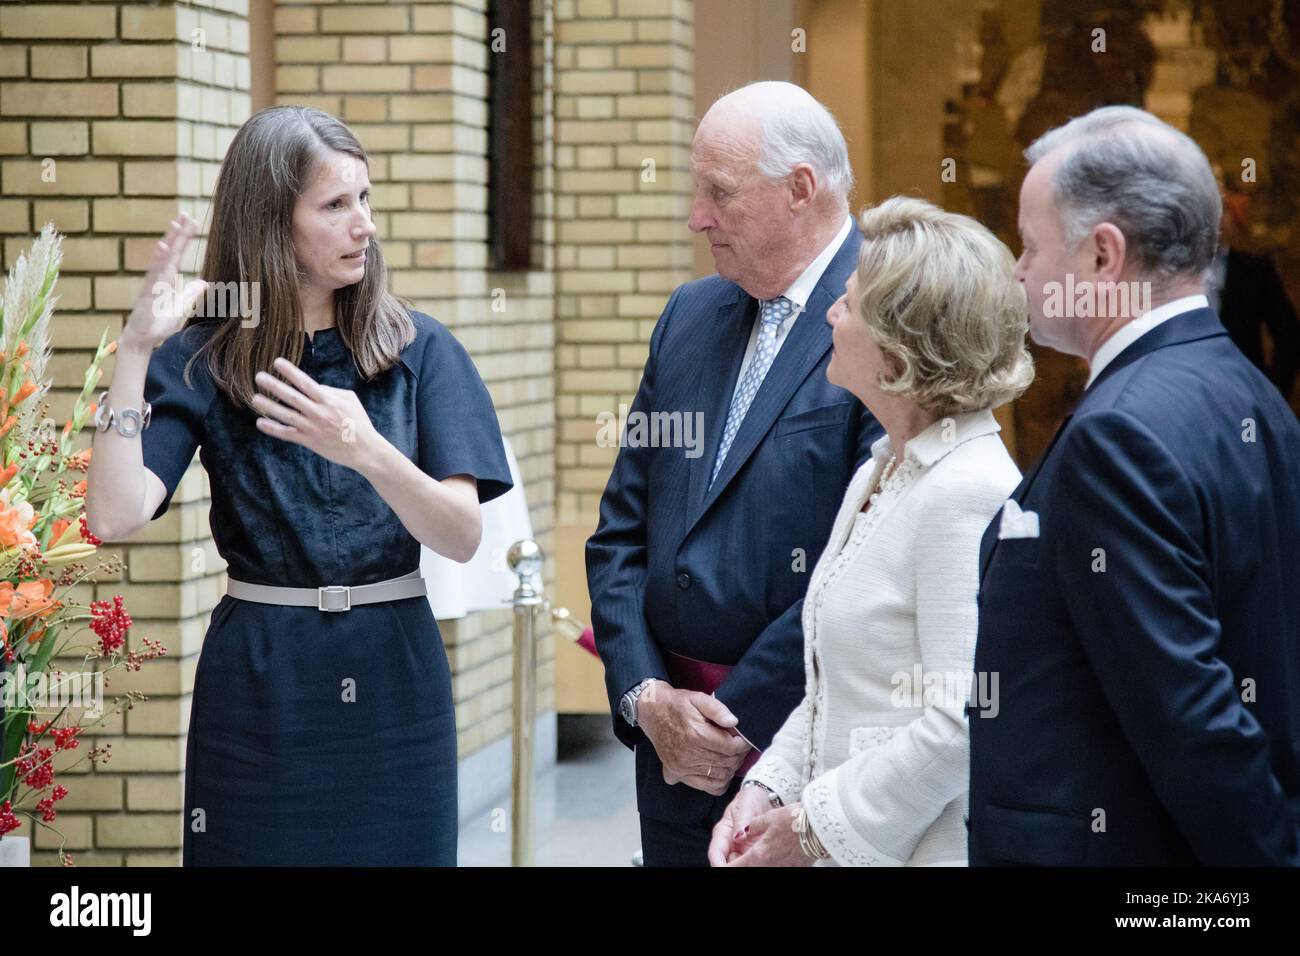 Oslo, Norway 20170918. Artist Kira Wager (left) talks with King Harald, Queen Sonja and President of the Storting Olemic Thommessen during the unveiling of the King and Queen's 80th anniversary gift from the Storting (Parliament) on Monday. The gift is a painting by Kira Wager called 'King Olav V's Oath for the Storting'. Photo: Audun Braastad / NTB scanpi Stock Photo